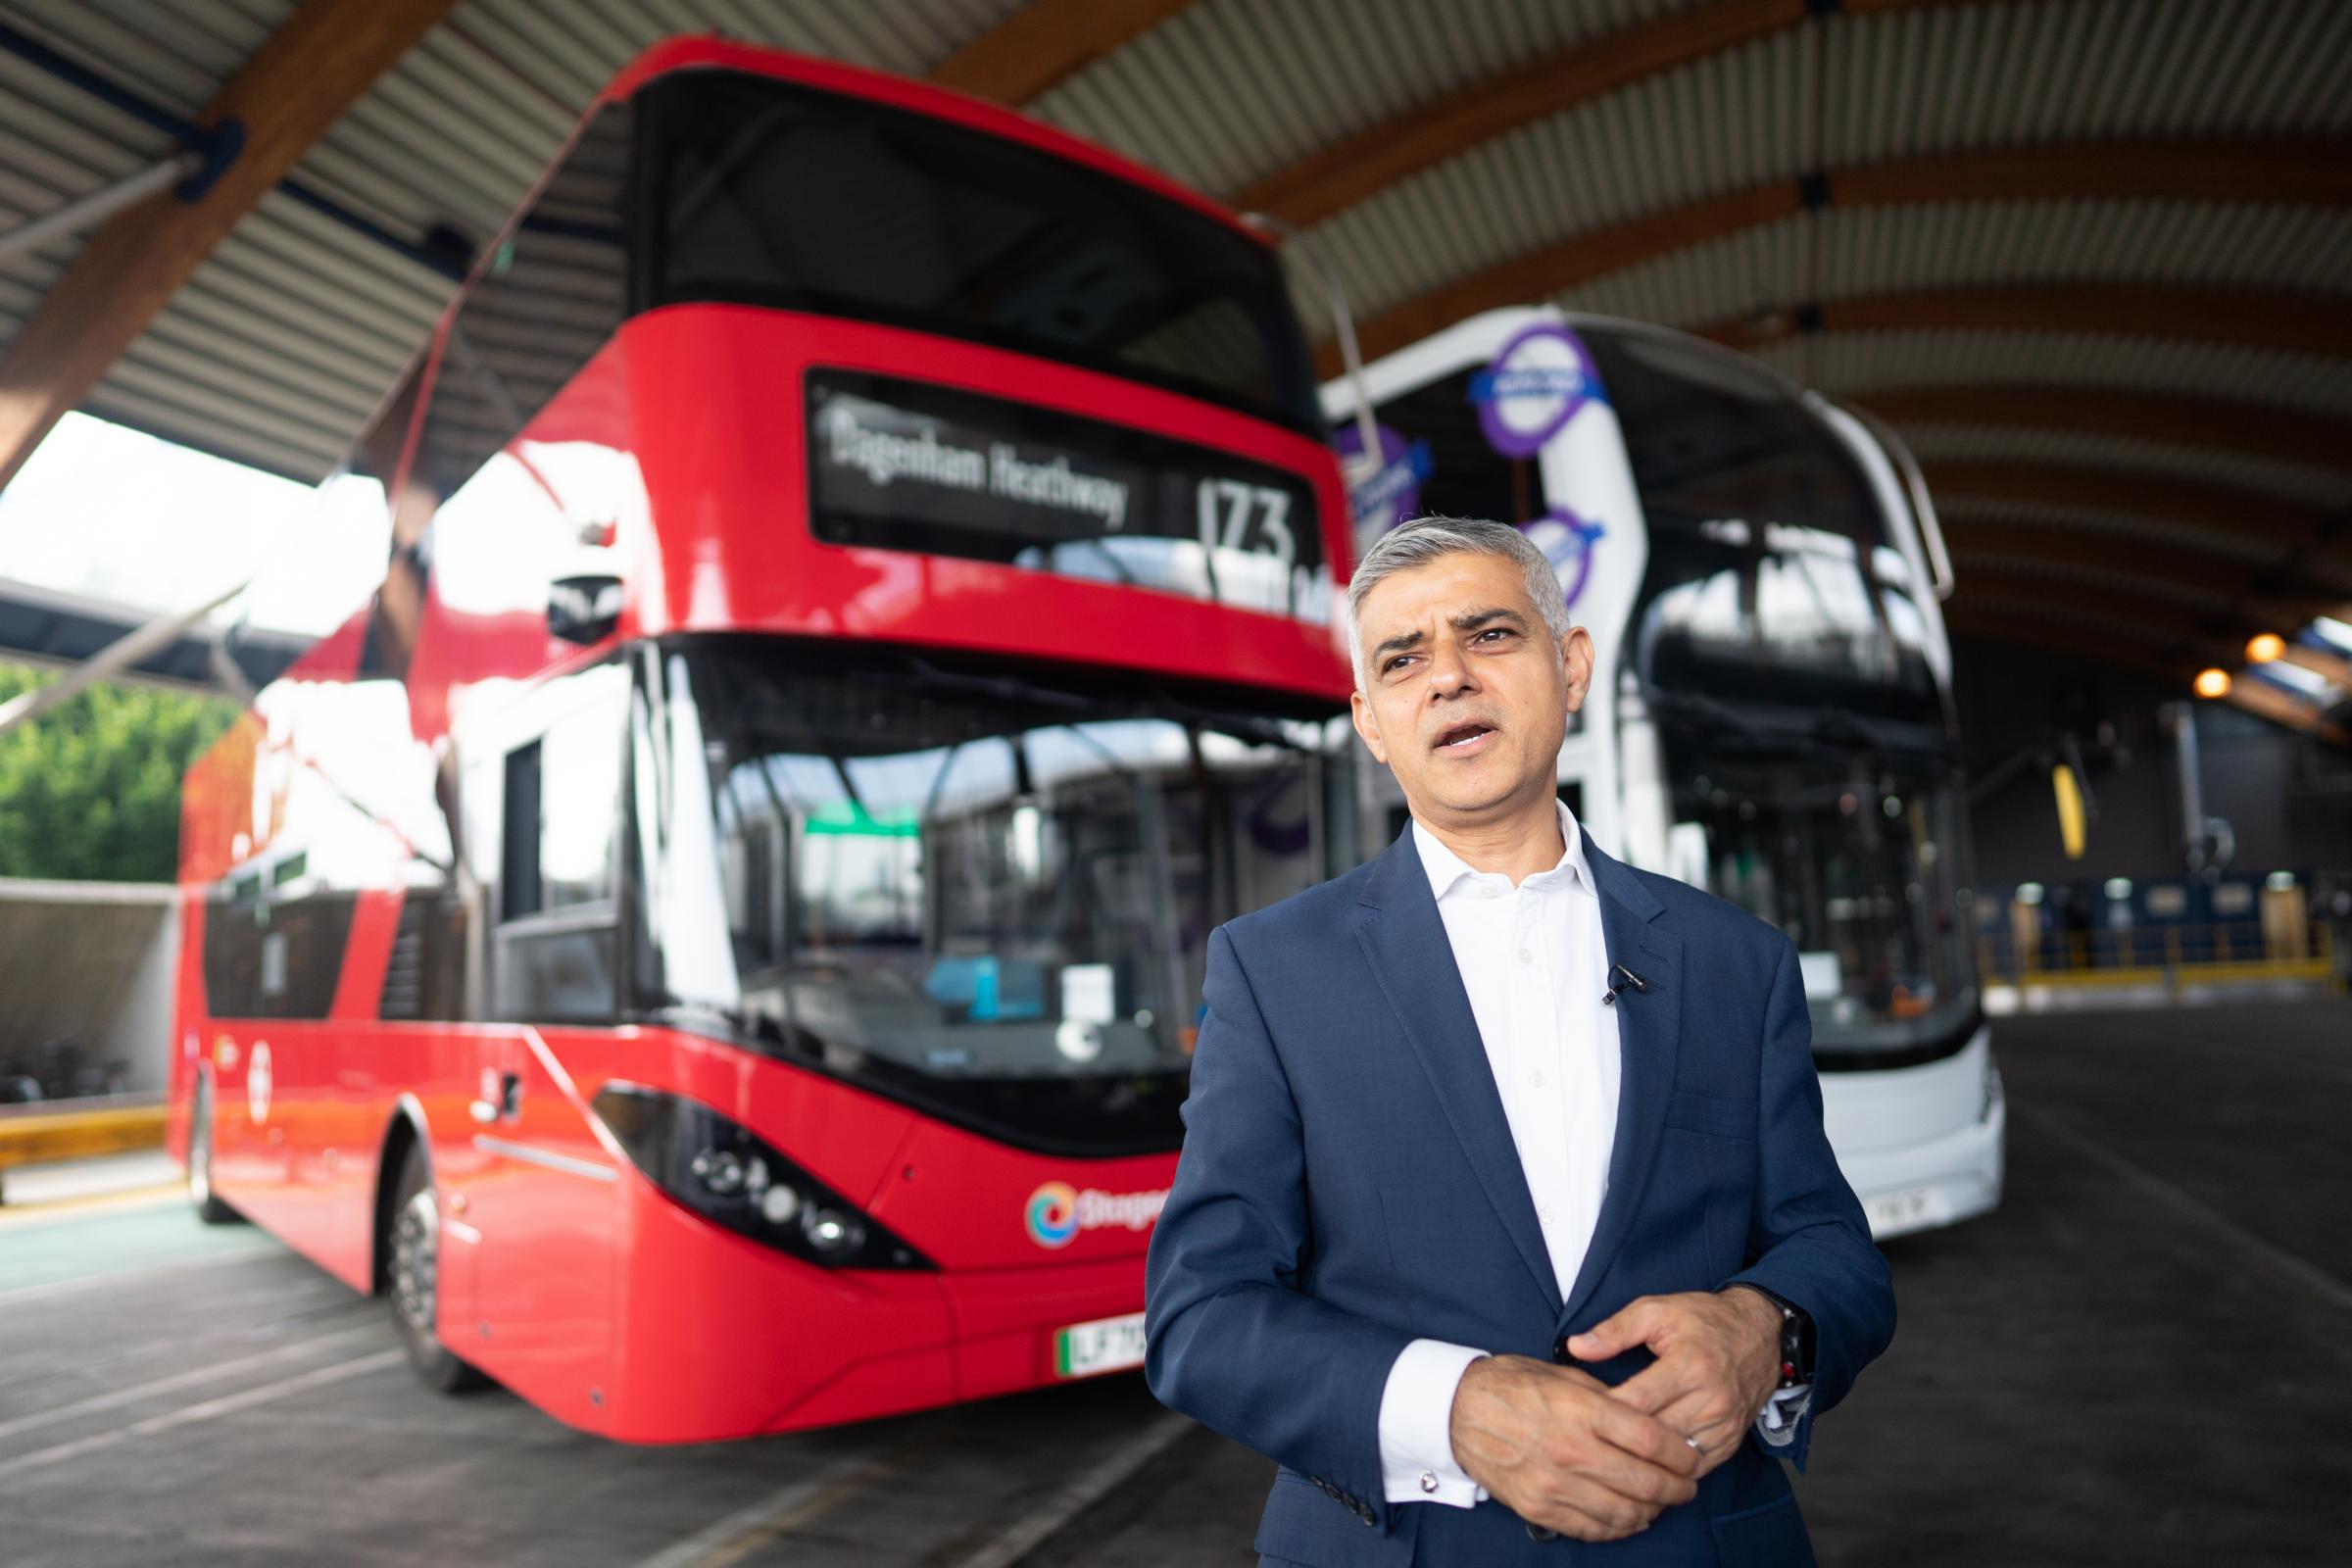 Funding needed to give Transport for London sustainable future